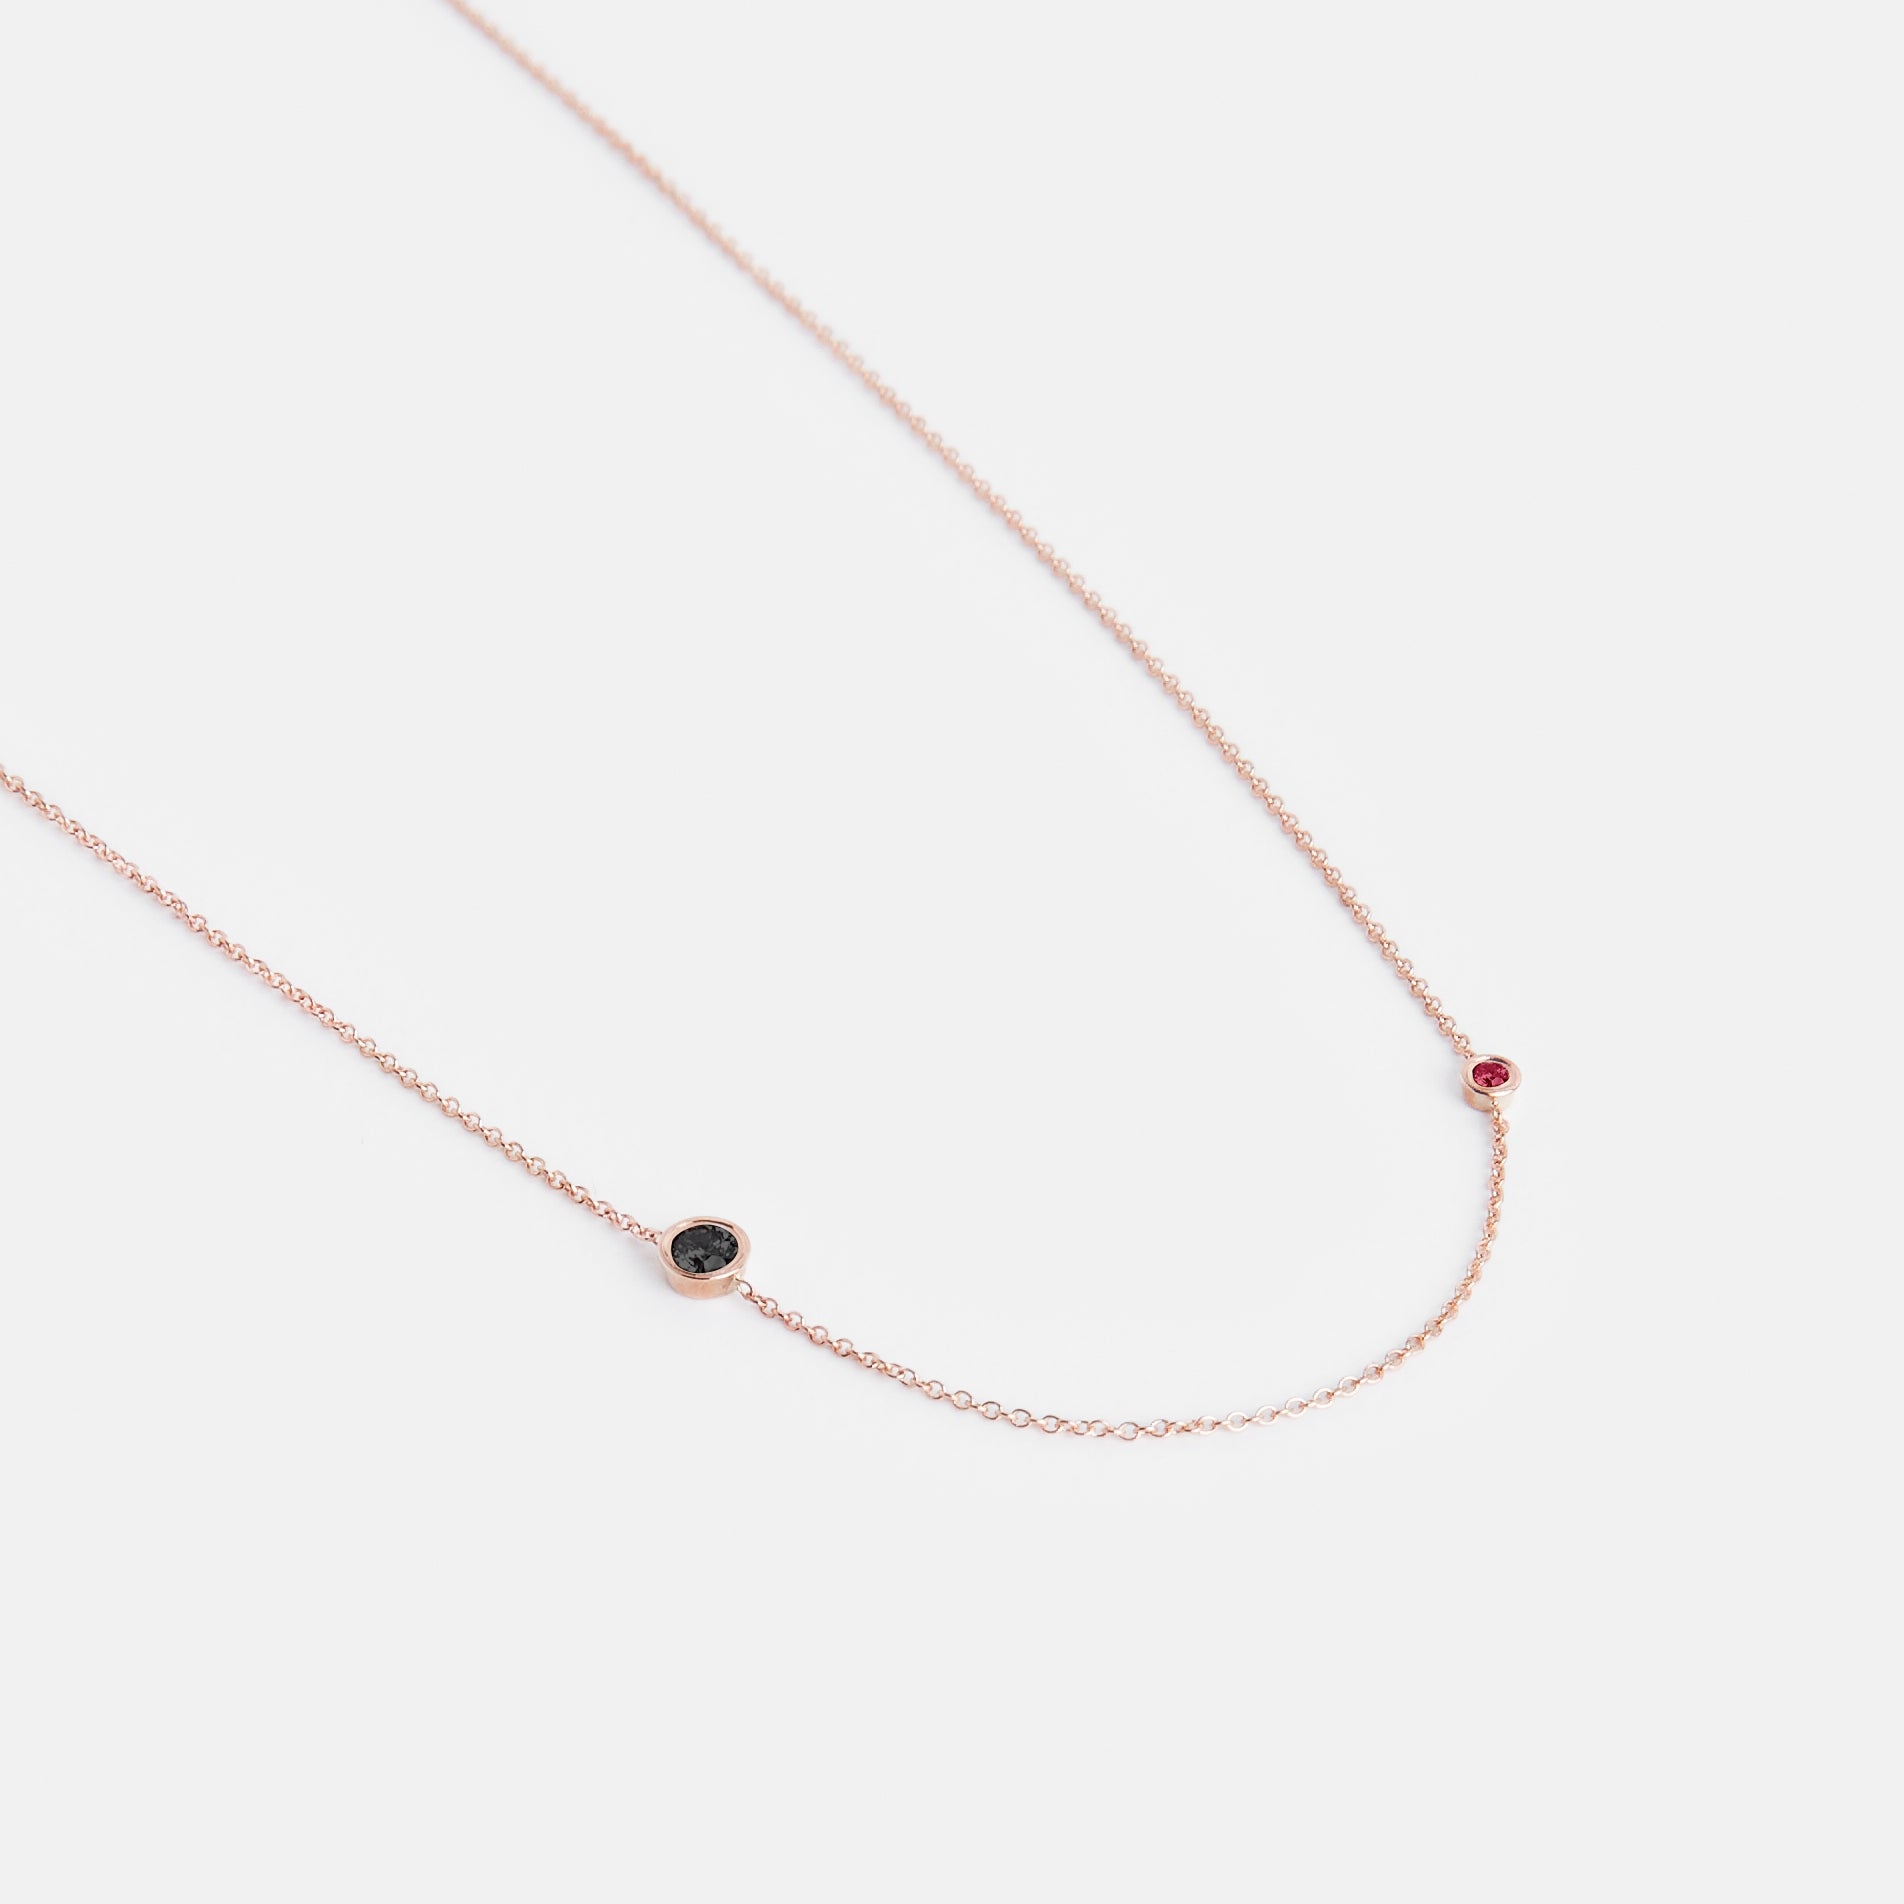 Iba Designer Necklace in 14k Rose Gold set with Black Diamond and Ruby By SHW Fine Jewelry NYC